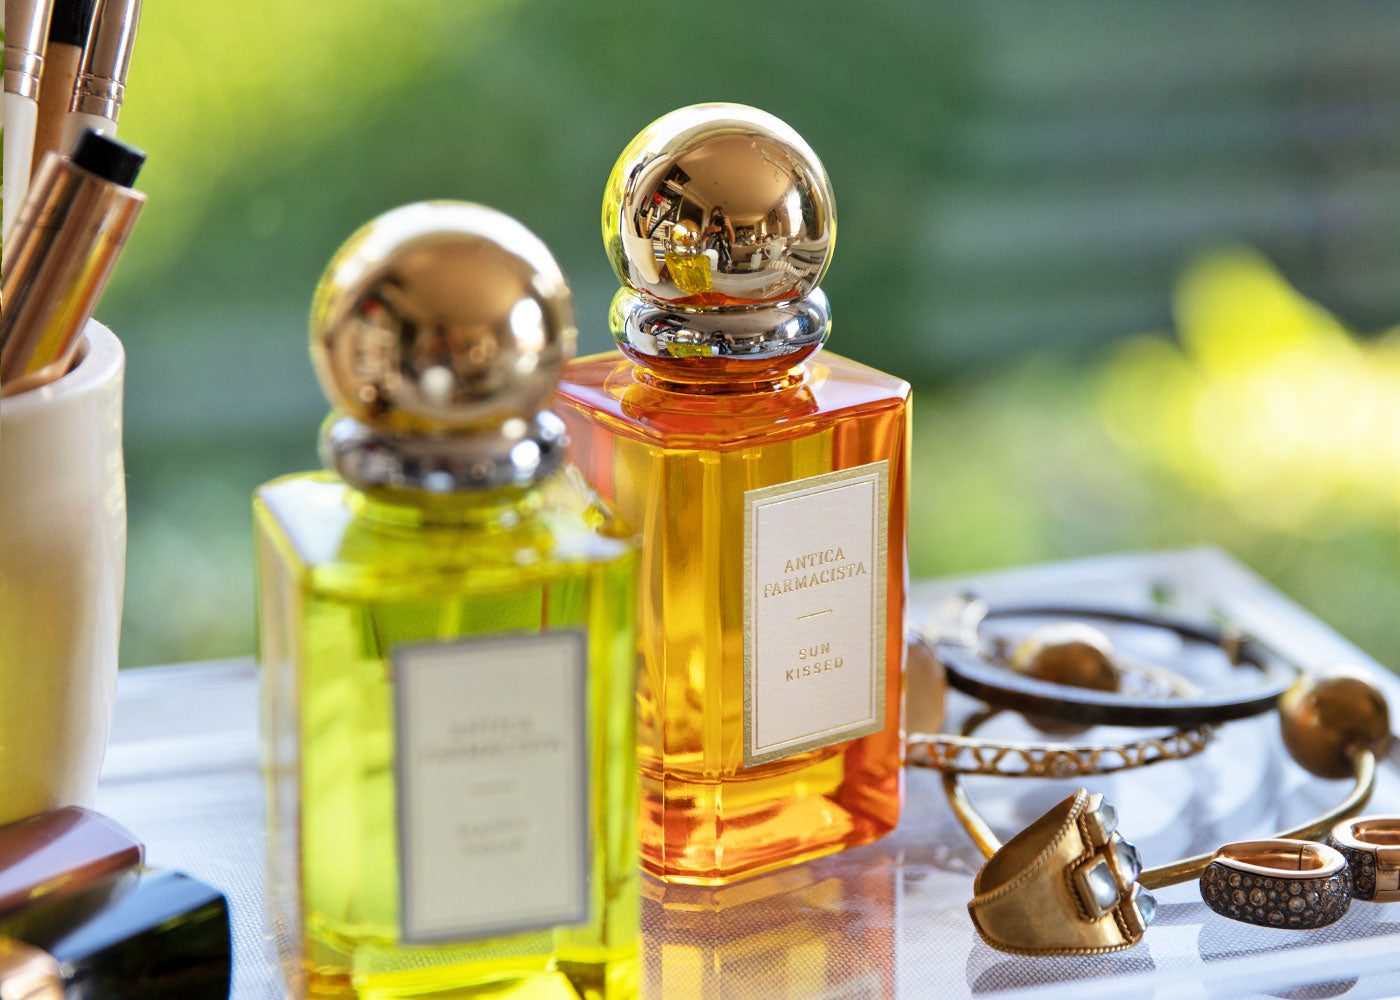 How To Find Your Signature Scent